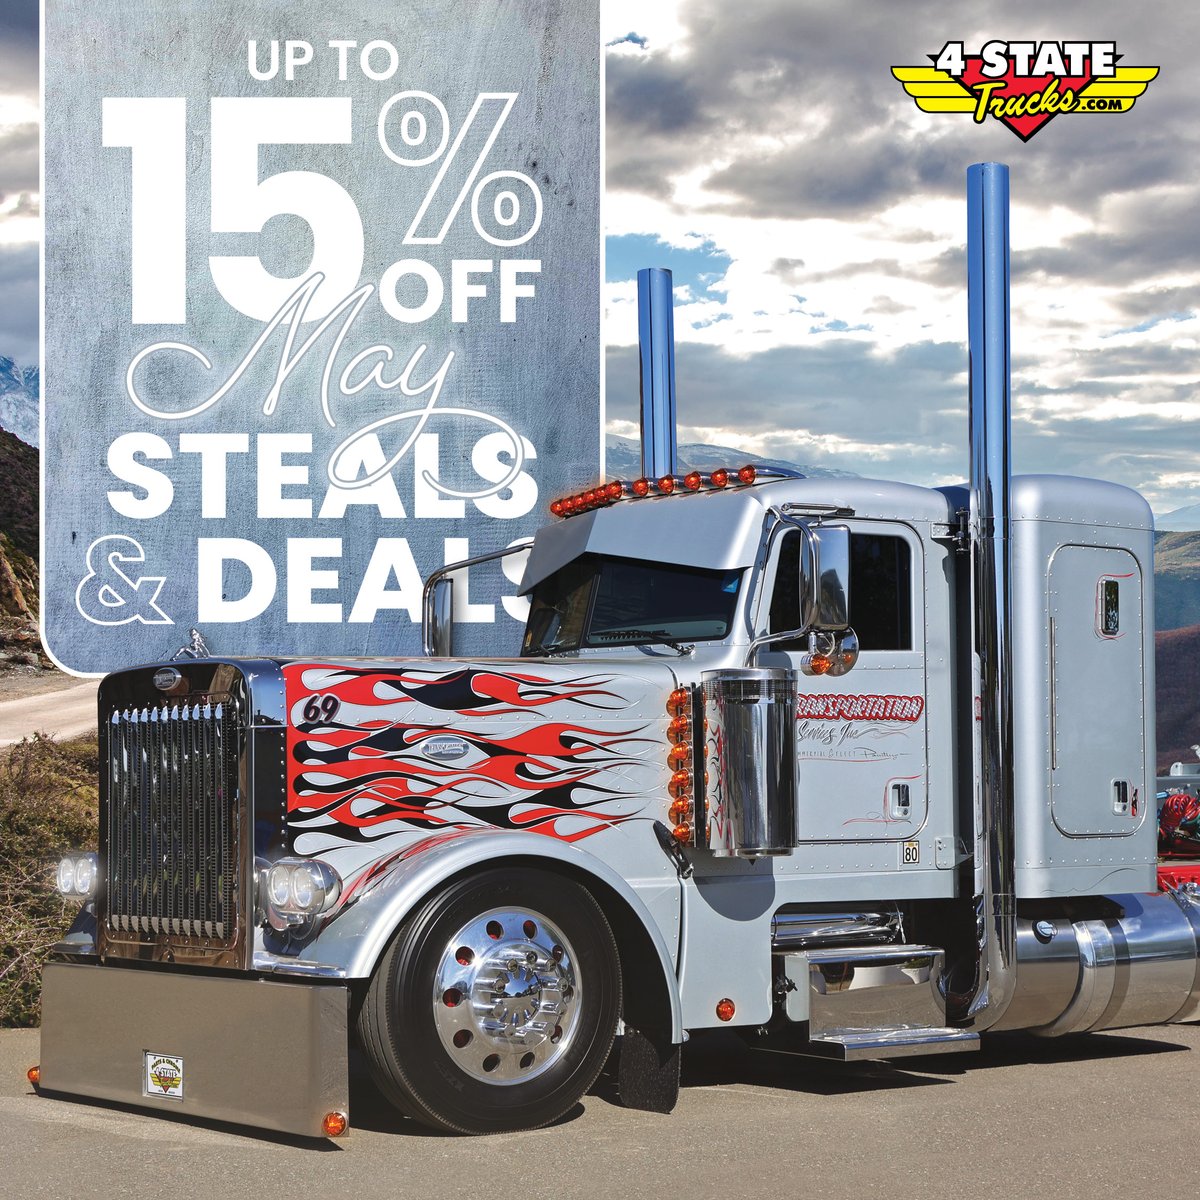 🚨Time's running out for May Steals & Deals!🚨
Shop them before they're gone: ecs.page.link/hpwUo.
Ends 5/31 11:59 p.m. cst.

#4StateTrucks #ChromeShopMafia #chrome #customtrucks #semitrucks #trucking #bigrig #18wheeler #tractortrailer #largecar #truckers #longhaul #diesel